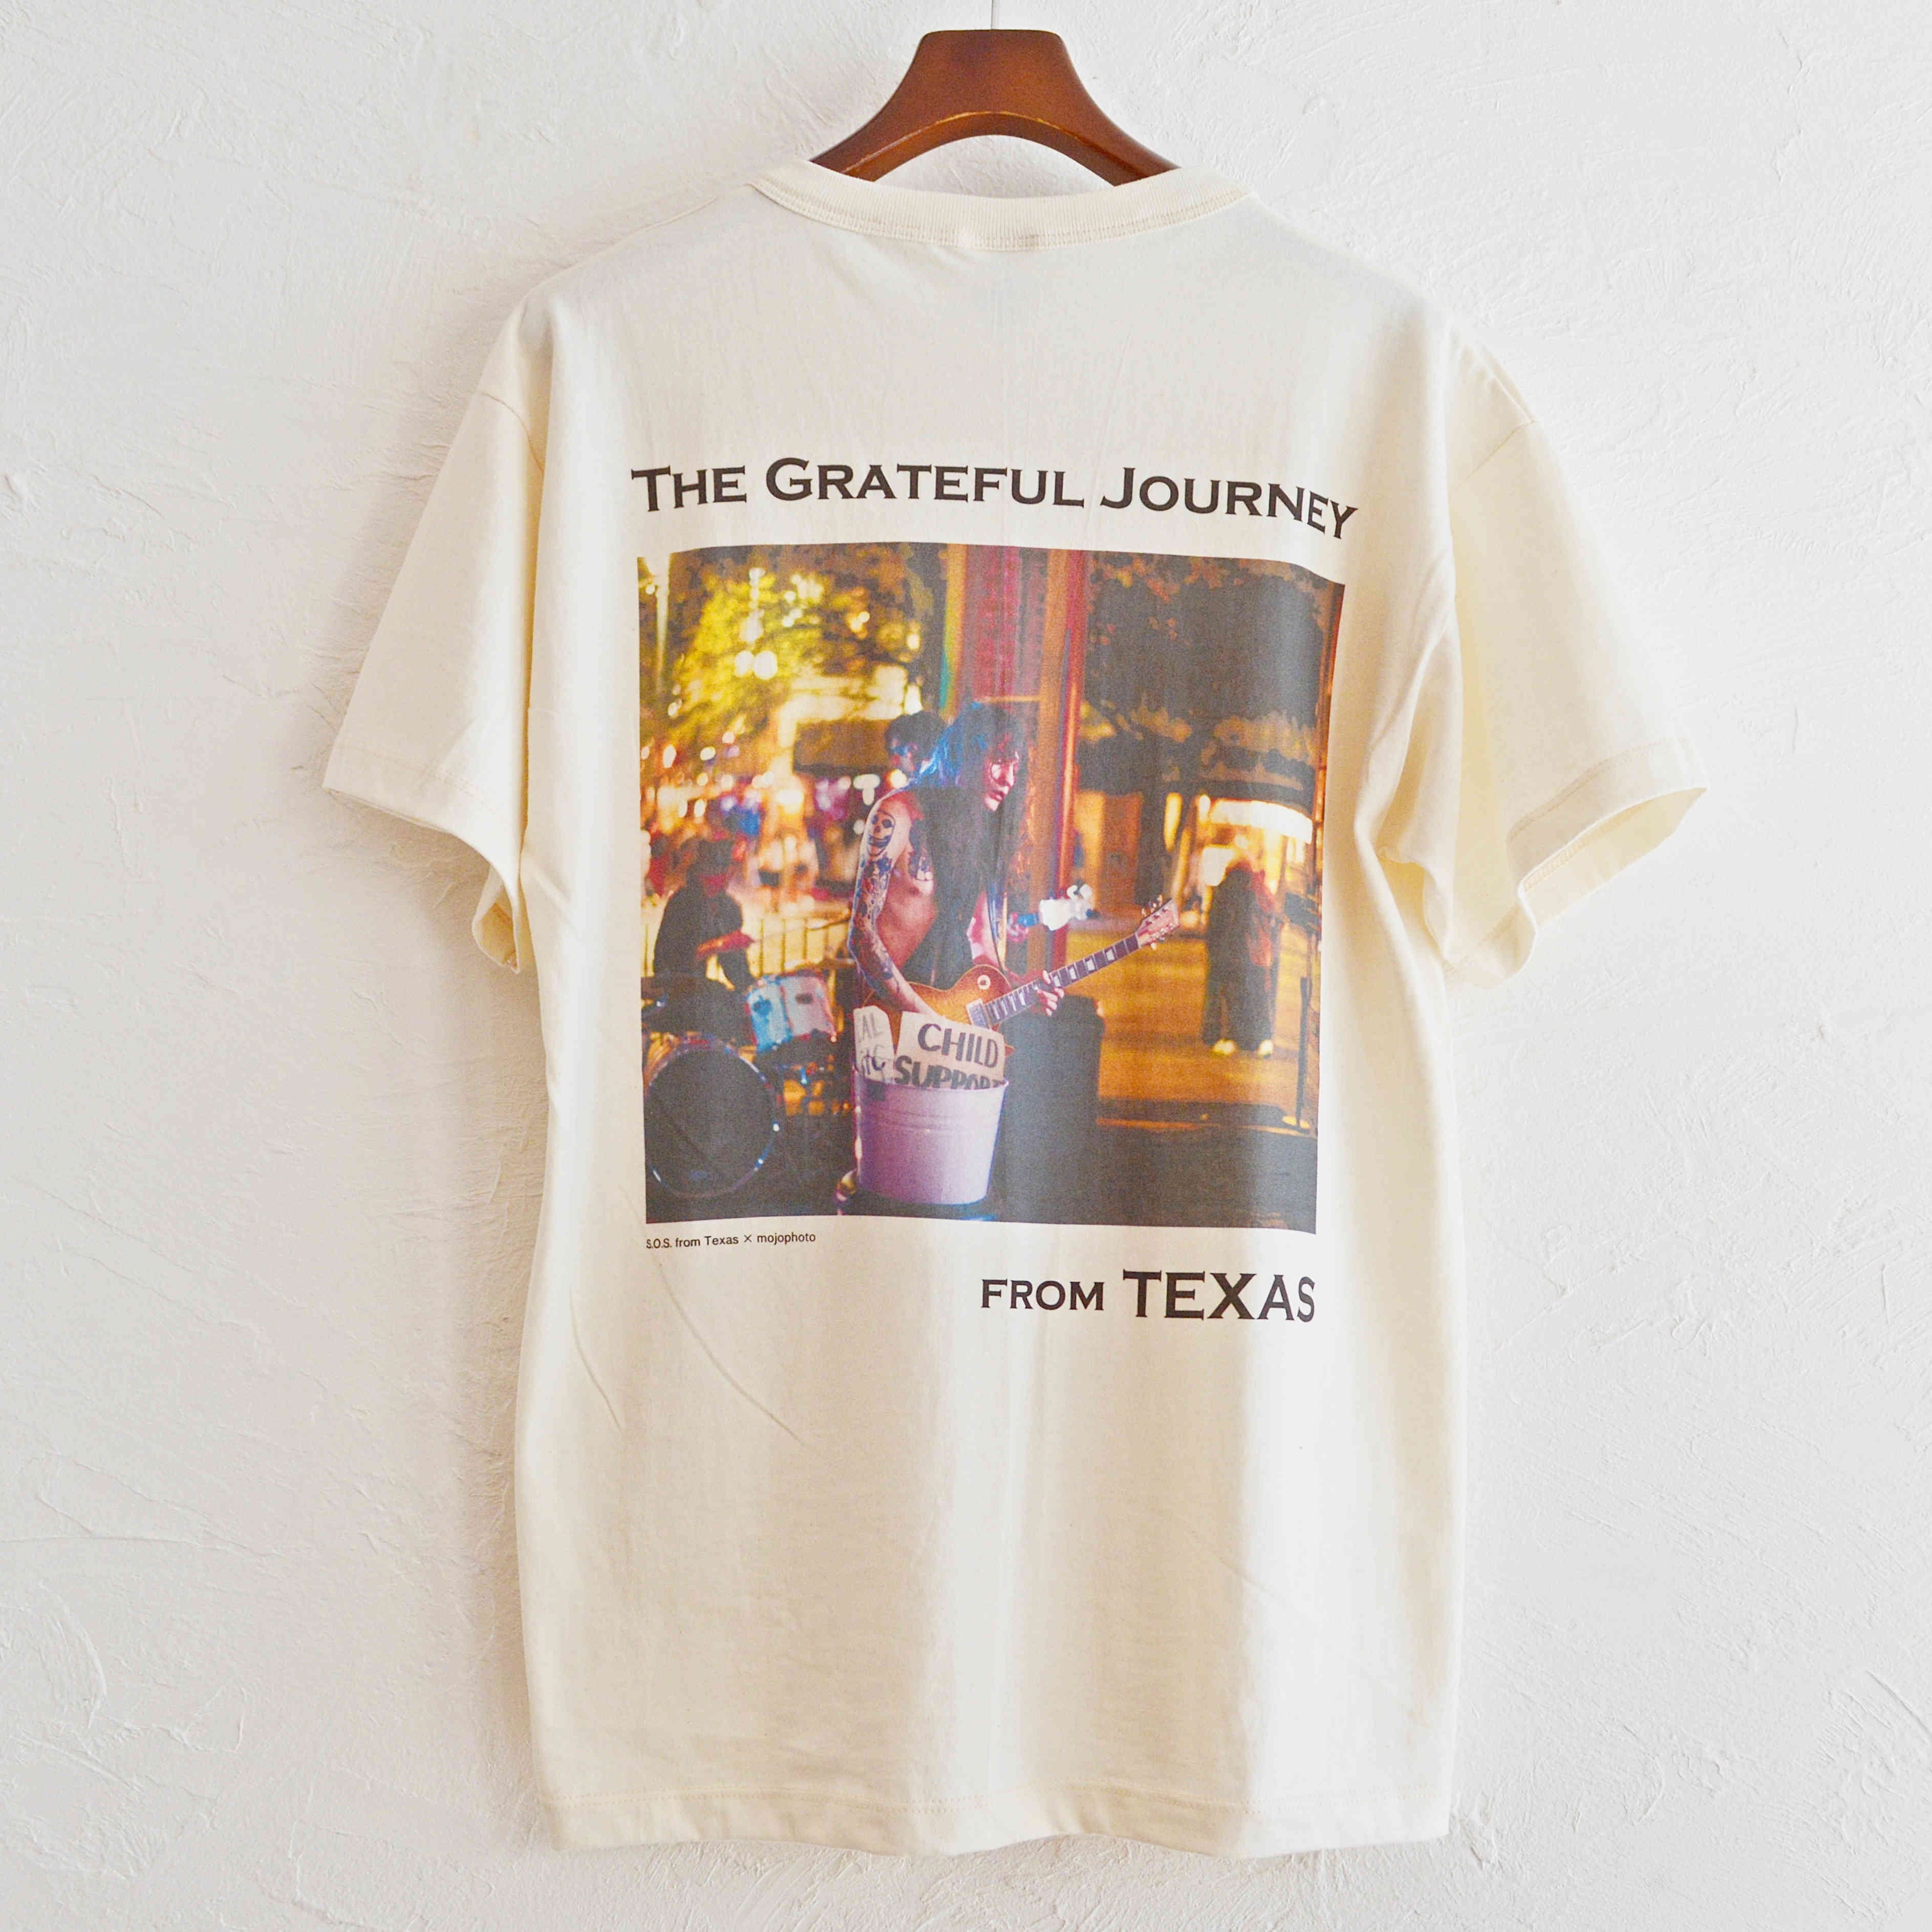 S.O.S. from Texas×mojophoto / ORGANIC COTTON 100% S/S CREW TEE THE GRATEFUL JOURNEY FROM TEXAS 『MUSIC』